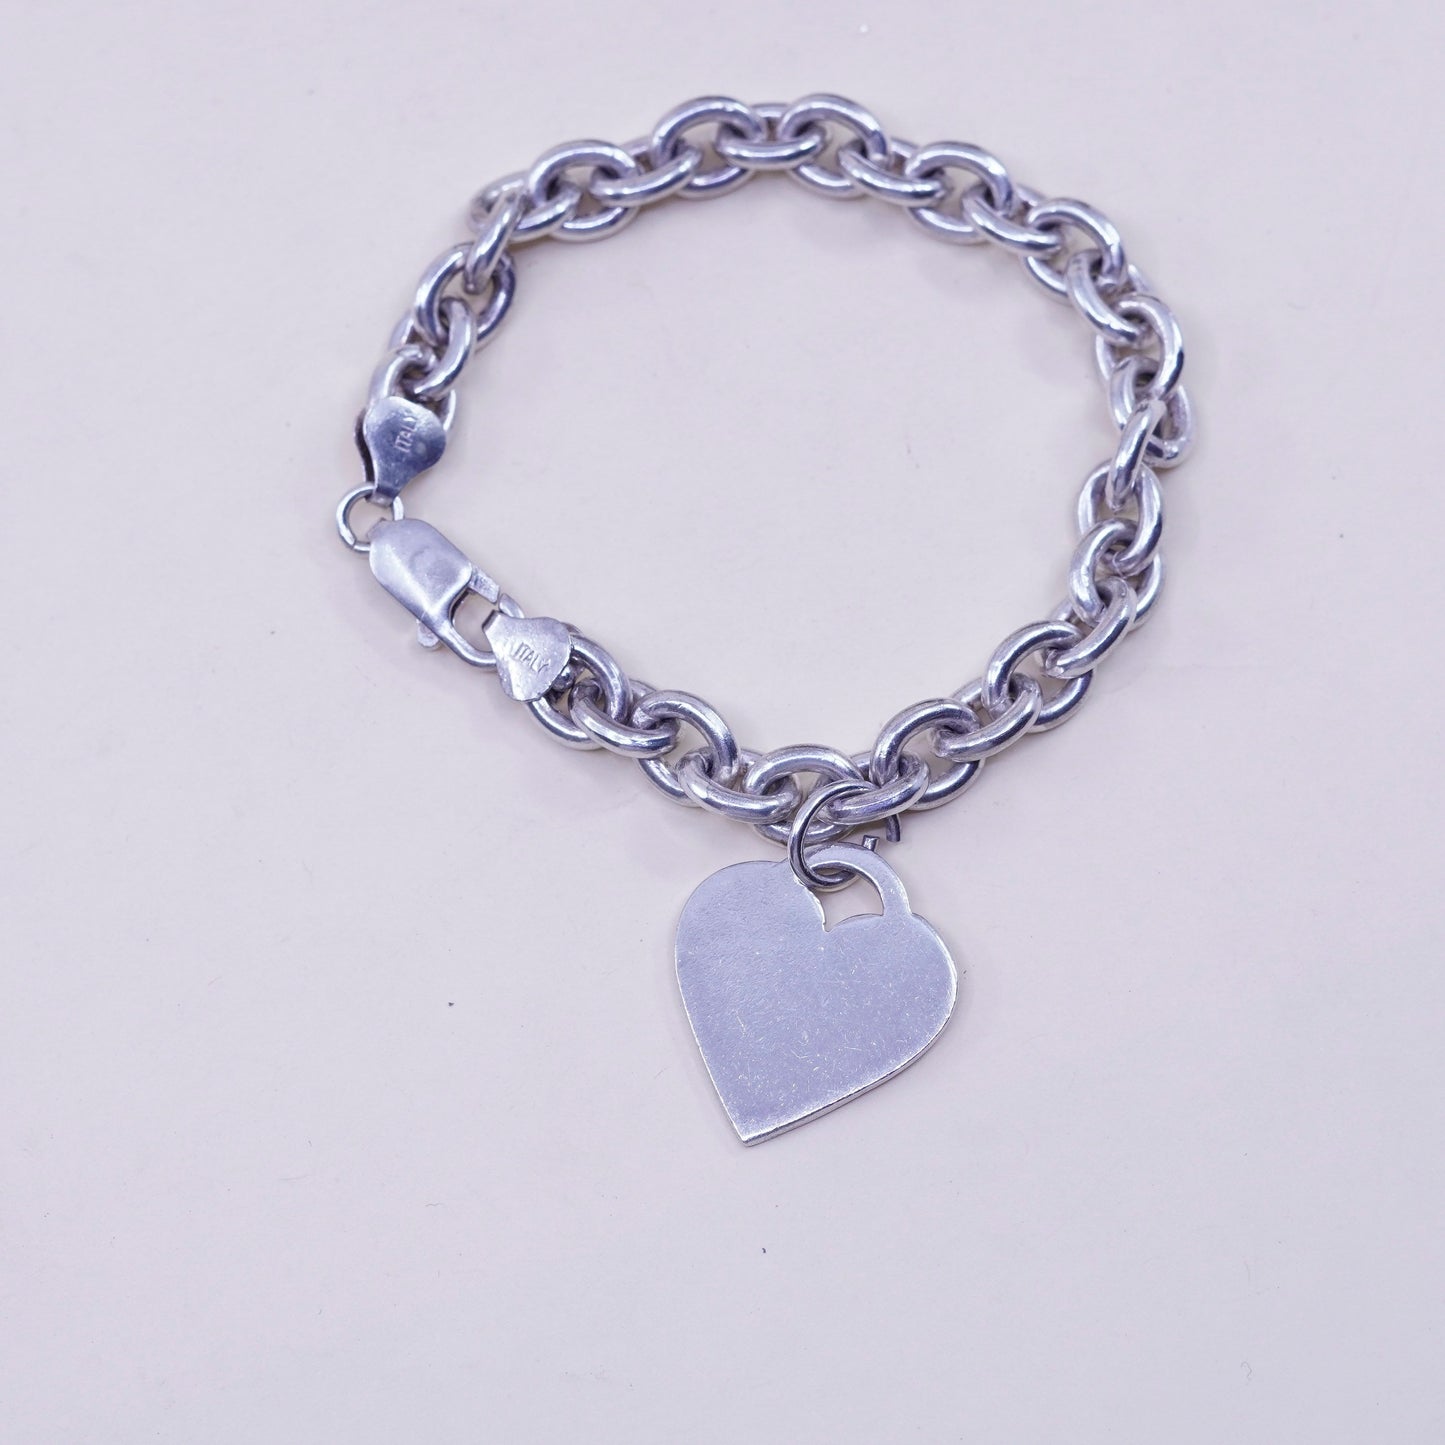 6.75”, Vintage sterling silver circle link bracelet, 925 chain with heart charm